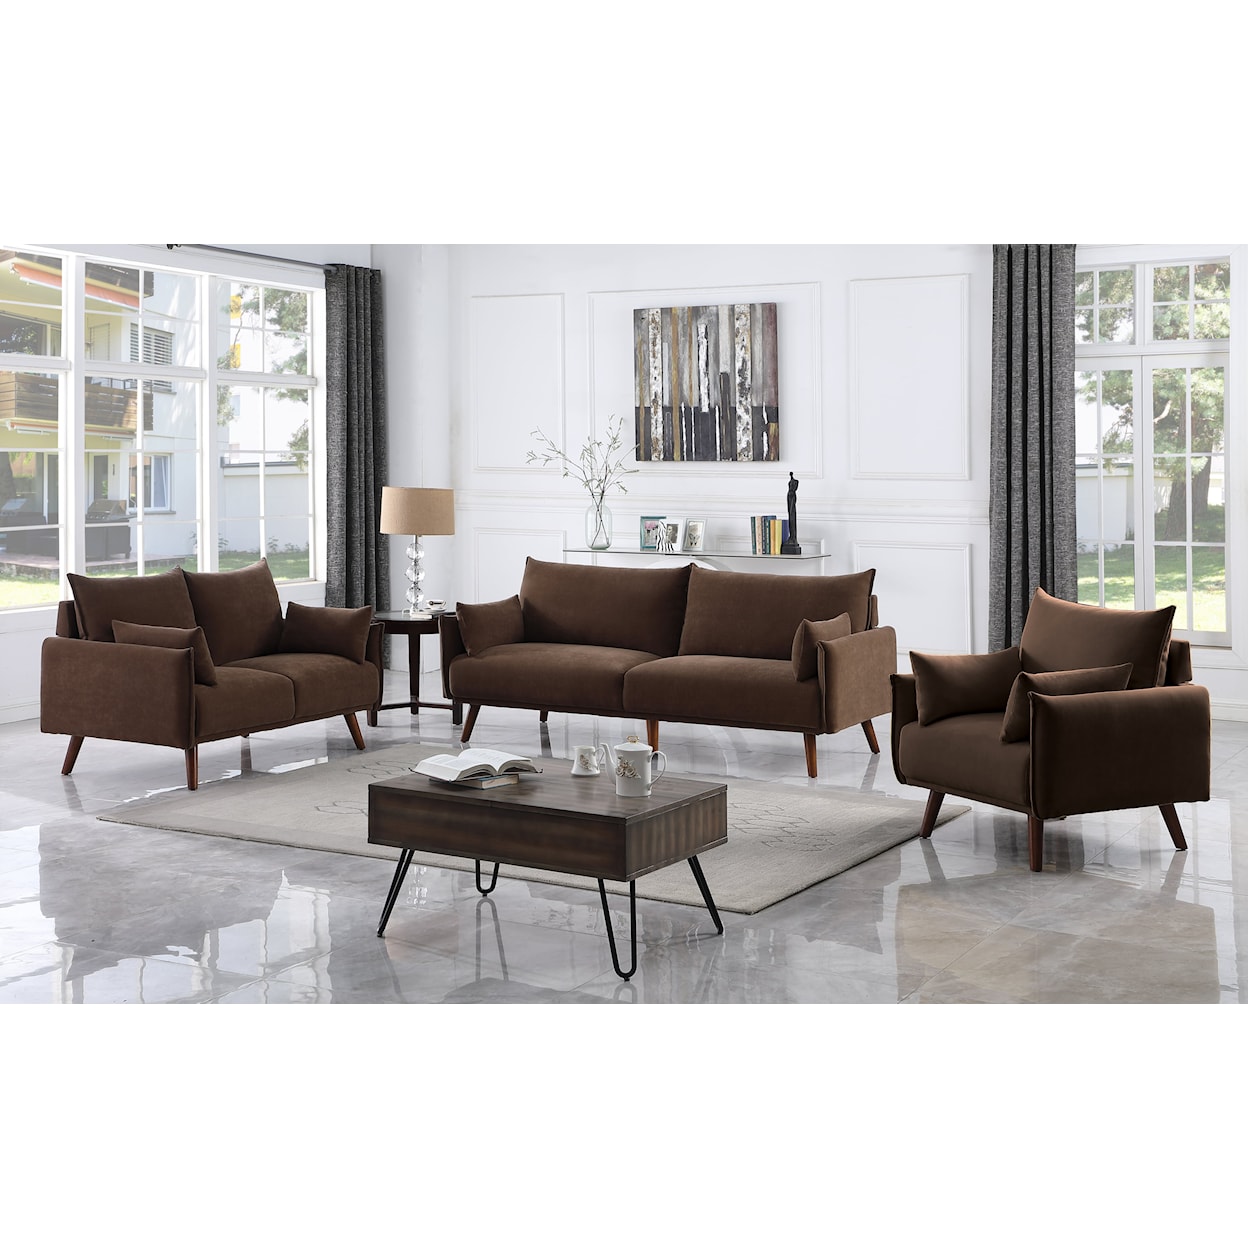 New Classic Reeves Living Room Set